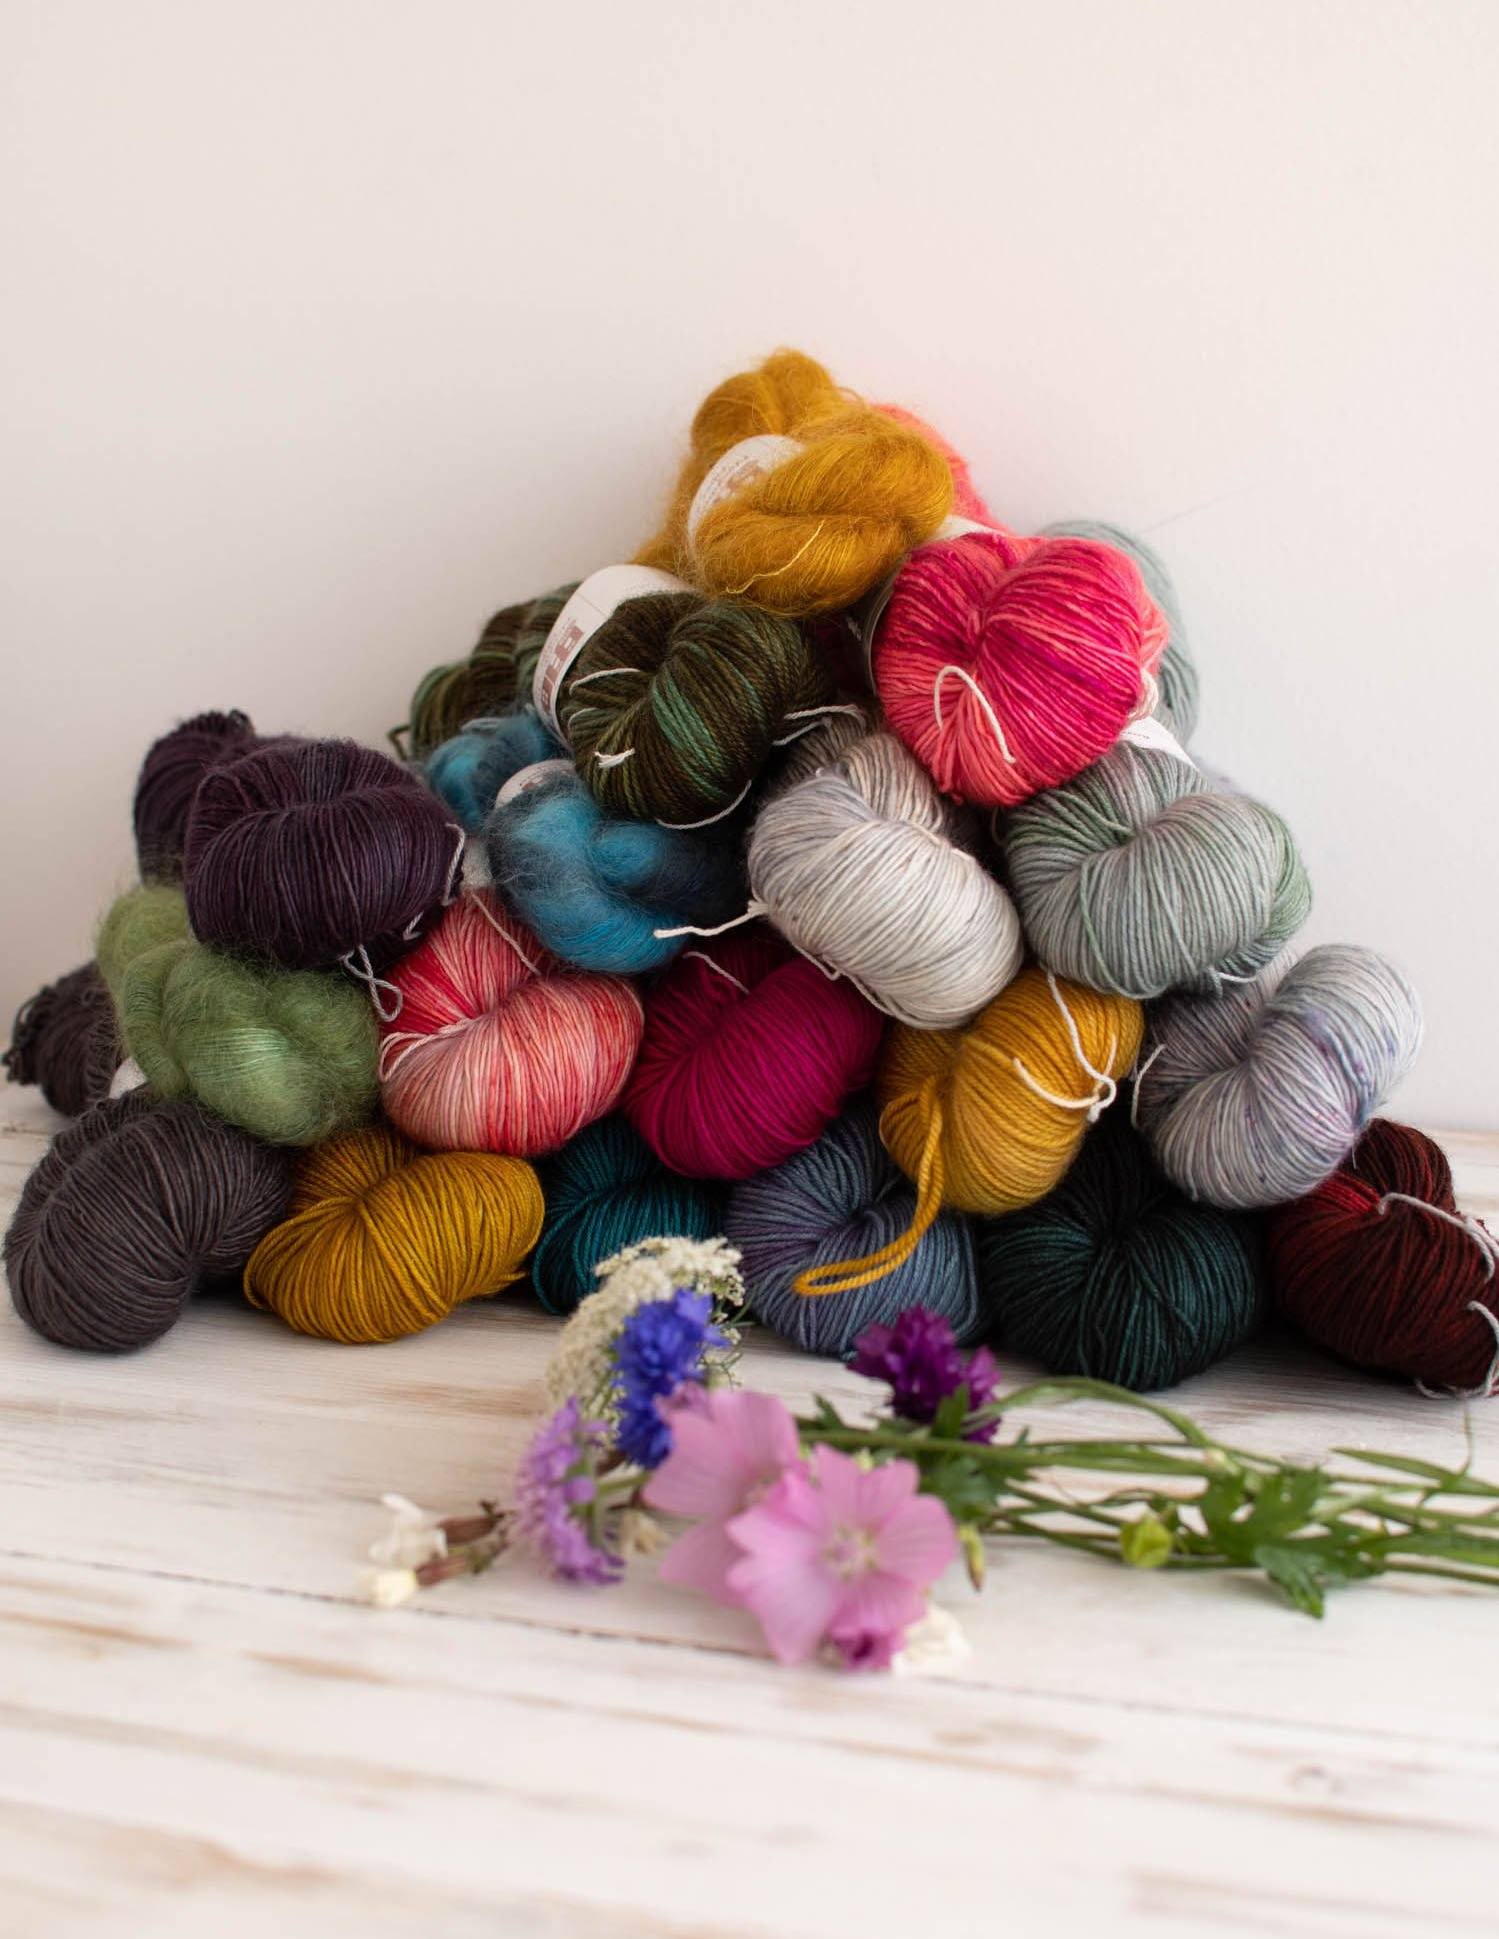 Neighborhood Fiber Co. is Now Available At Ysolda.com